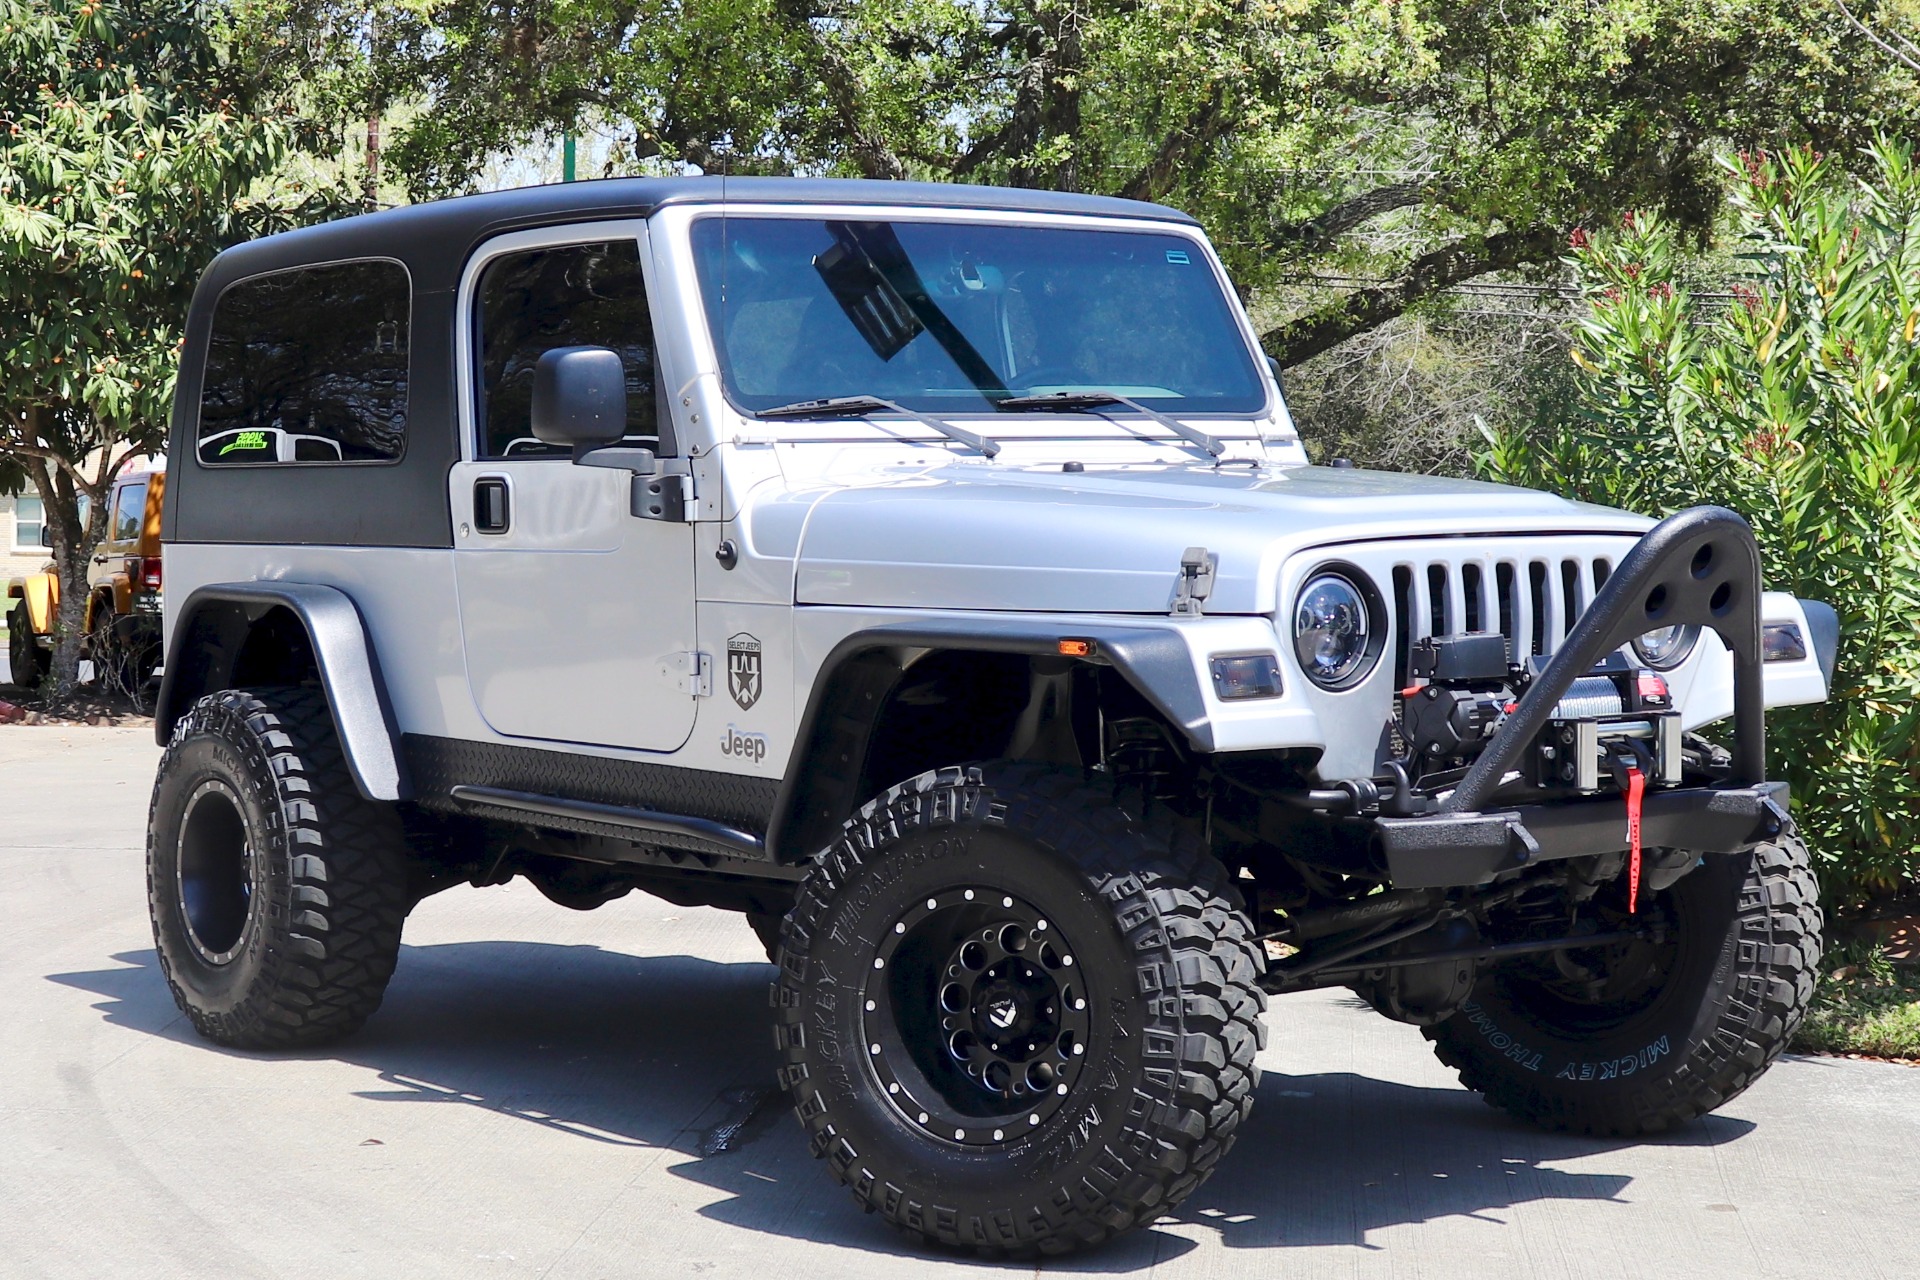 Used 2005 Jeep Wrangler Unlimited For Sale ($19,995) | Select Jeeps Inc.  Stock #359568